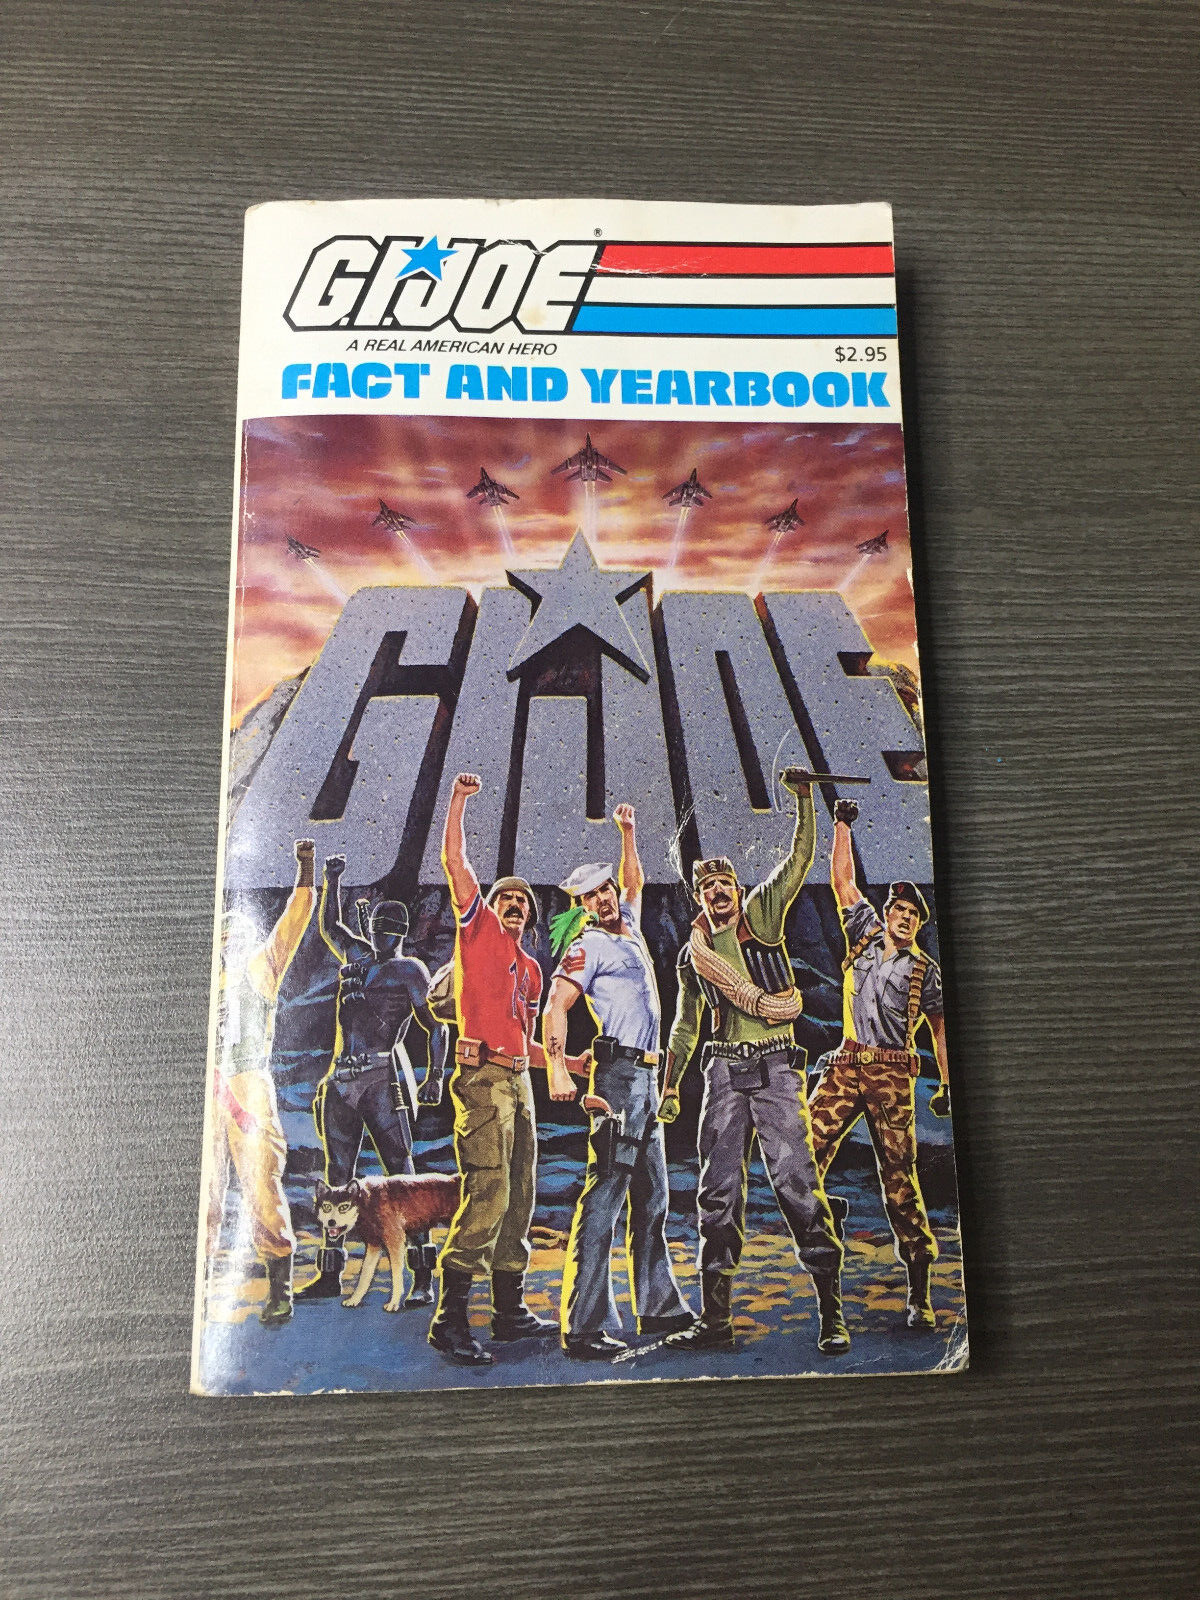 Vintage 1985 GI Joe A Real American Hero Fact And Yearbook Paperback Book